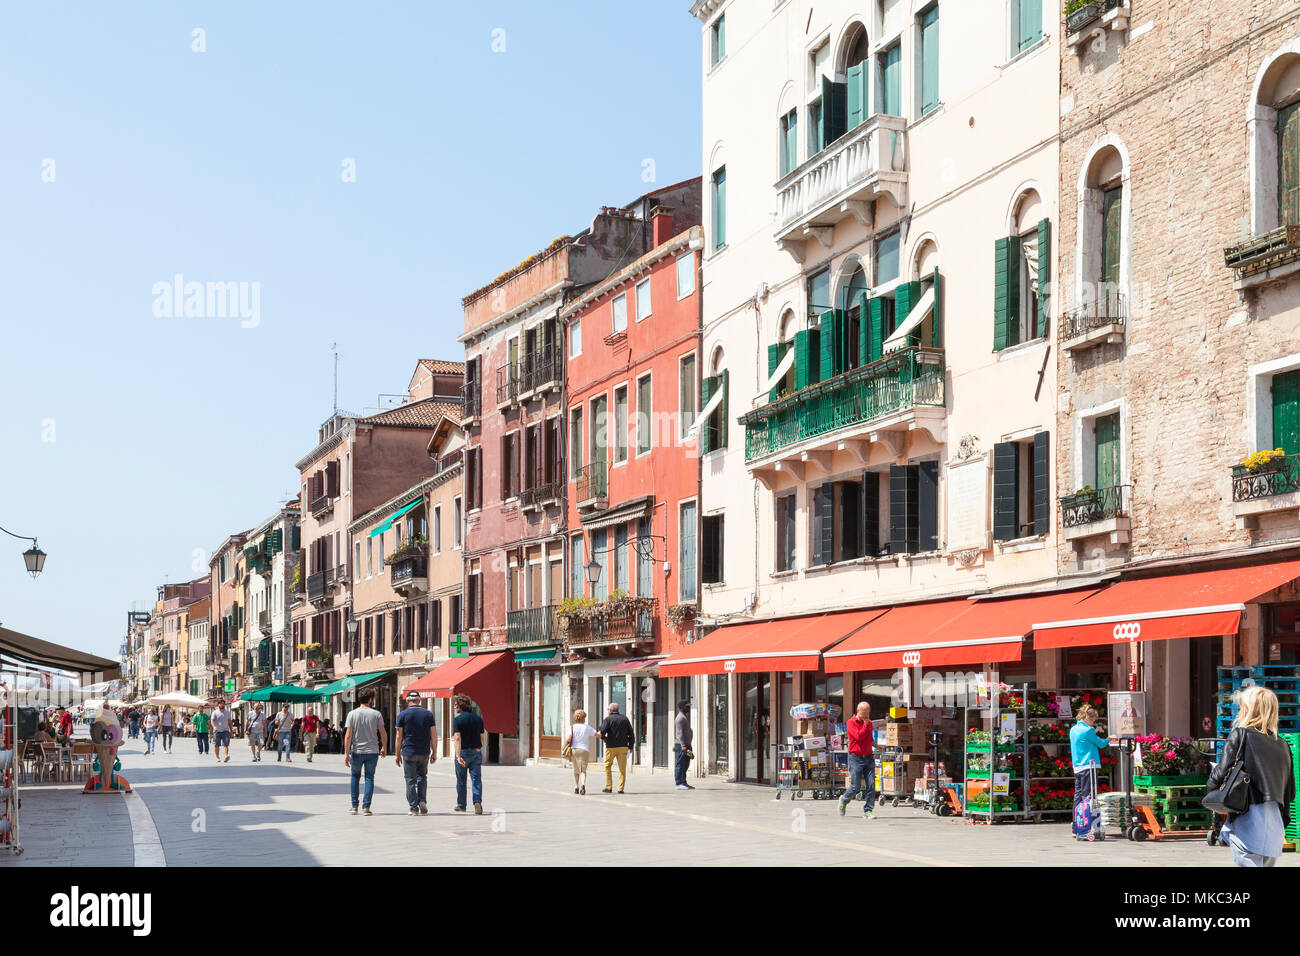 Busy pedestrian street scene in via Garibaldi, Castello, Venice, Veneto, Italy with local Venetians and tourists shopping at stores and a  Coop superm Stock Photo